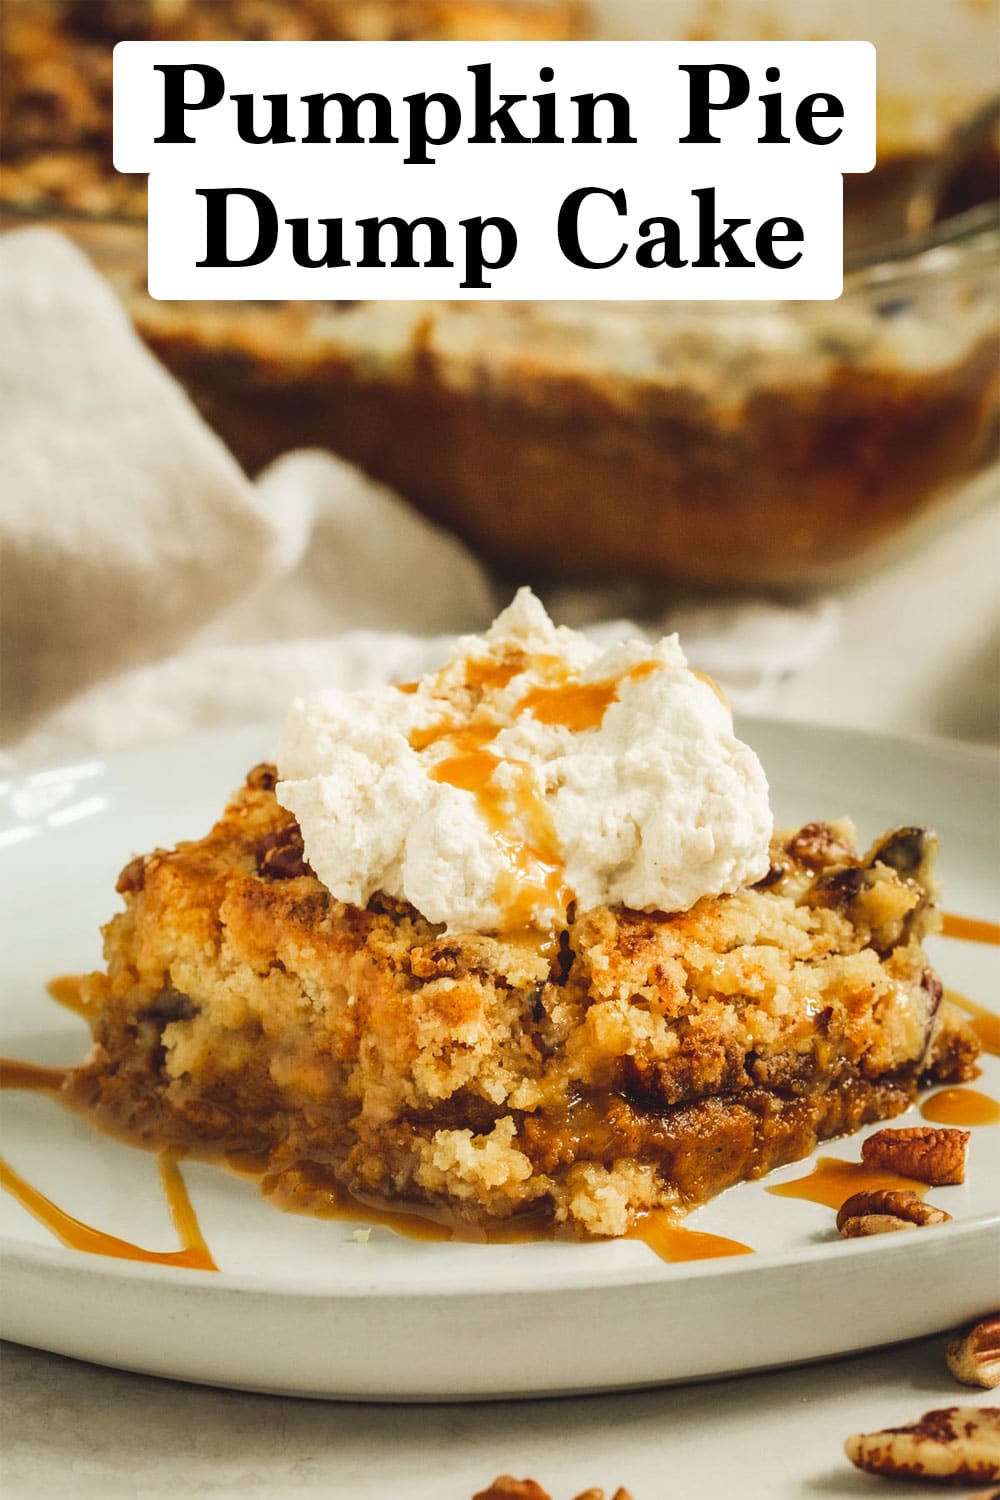 Pumpkin pie dump cake with whipped cream and caramel sauce on top.